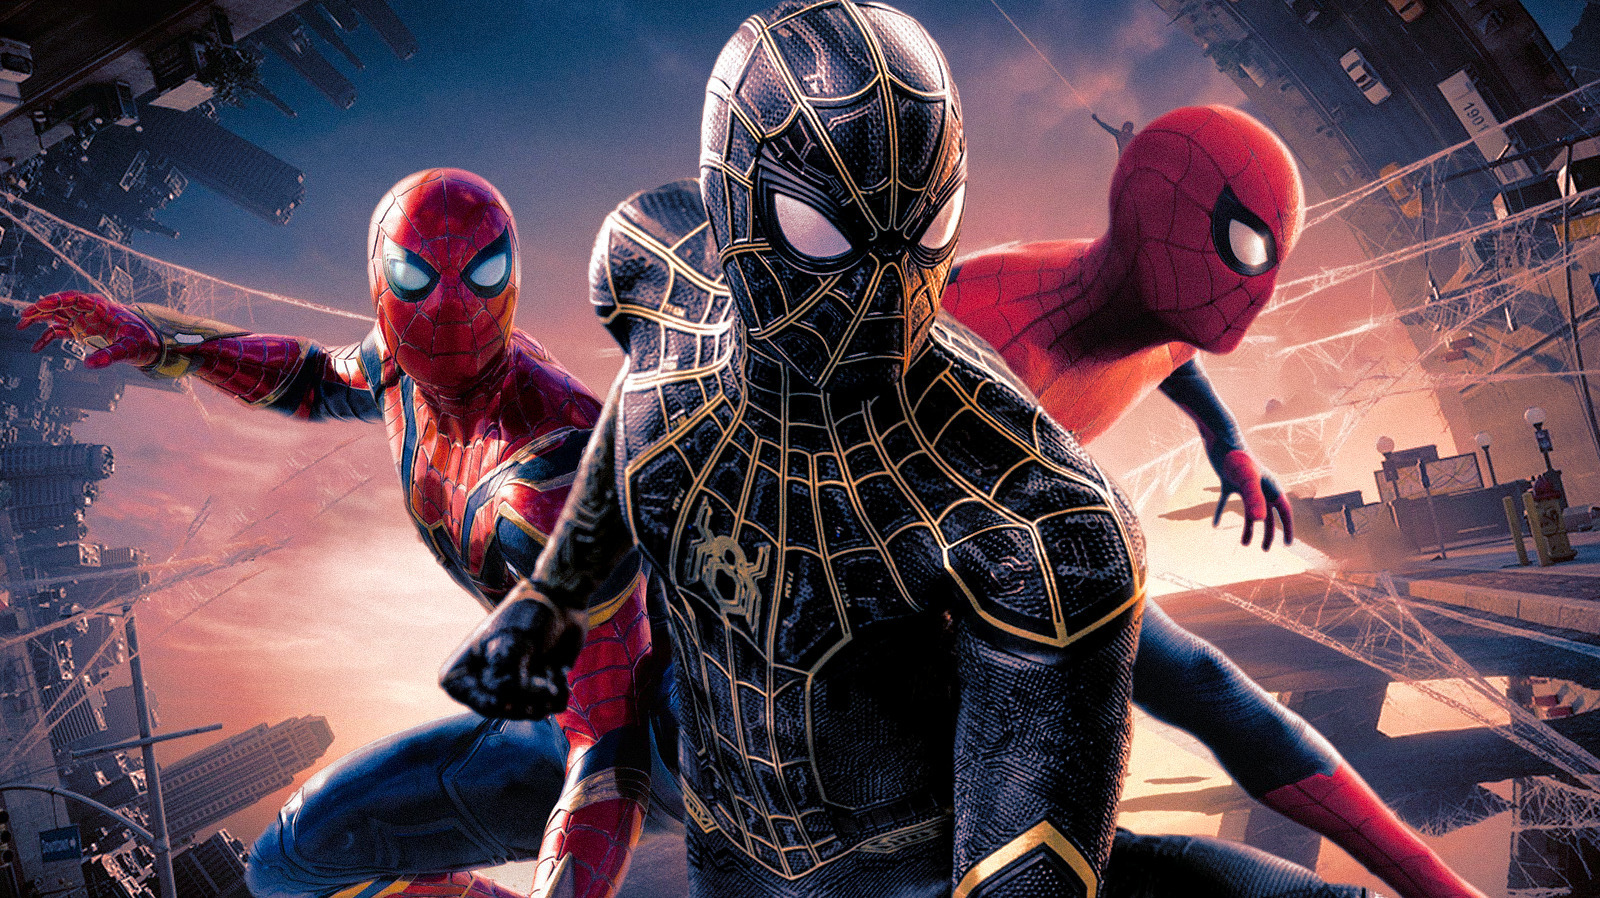 What You Should Know About Each Suit In Spider-Man: No Way Home